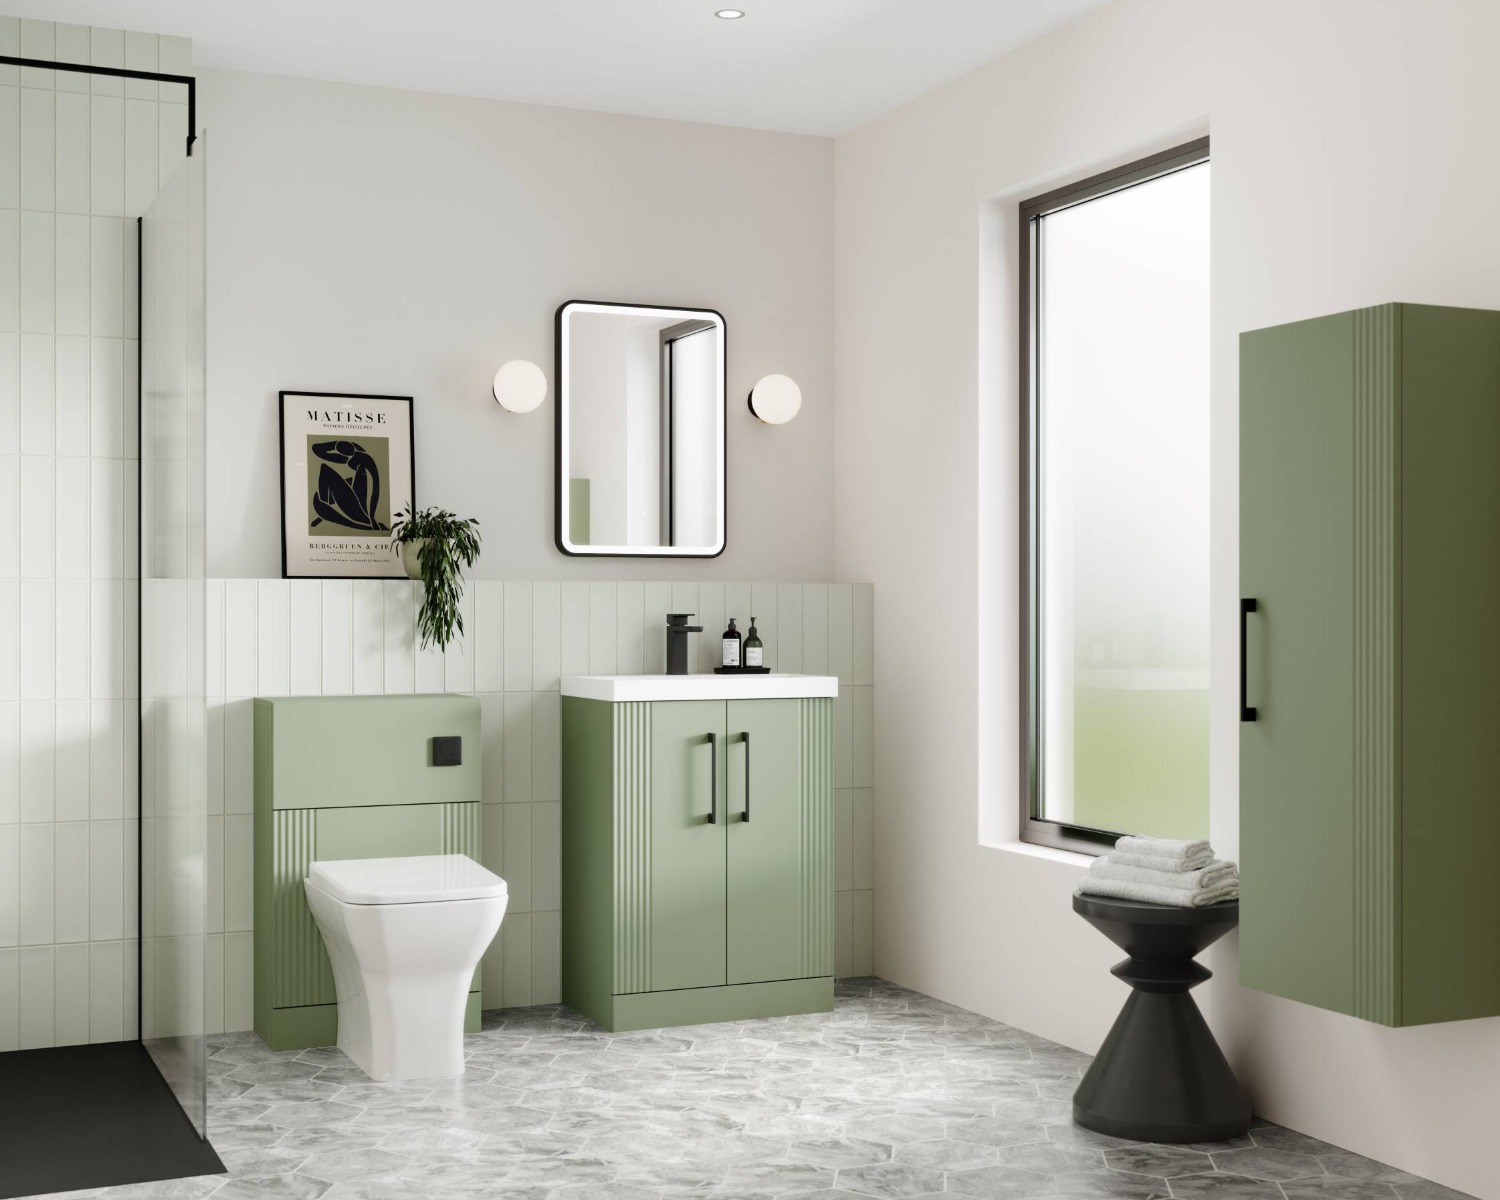 Design Ideas for a Green Vanity and Bathroom